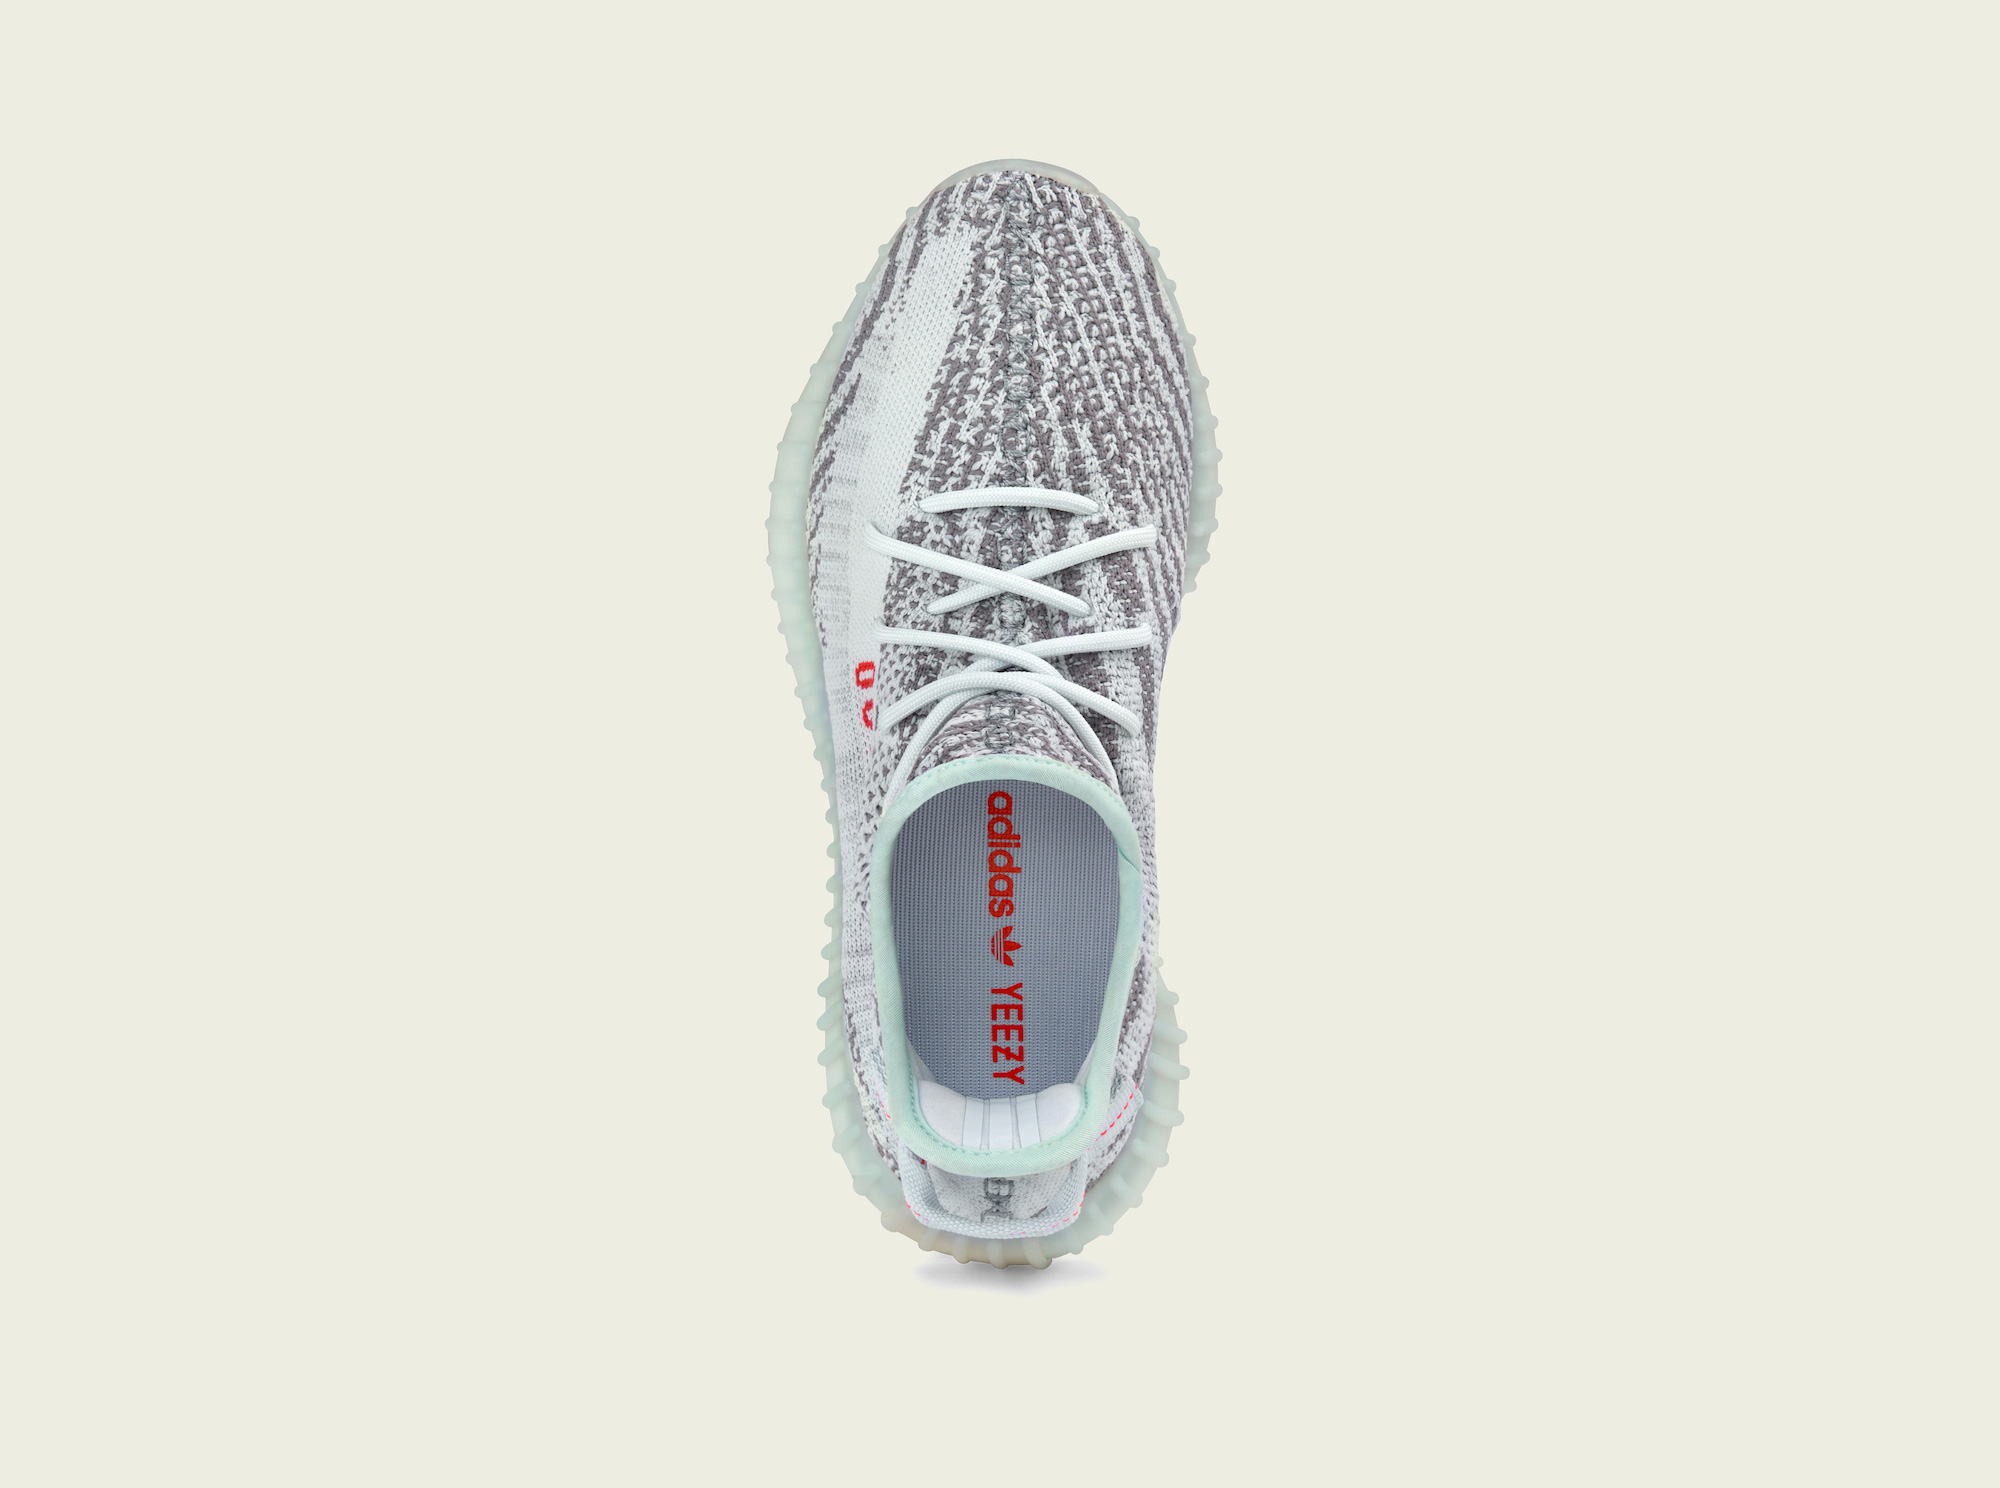 yeezy blue tint resell price